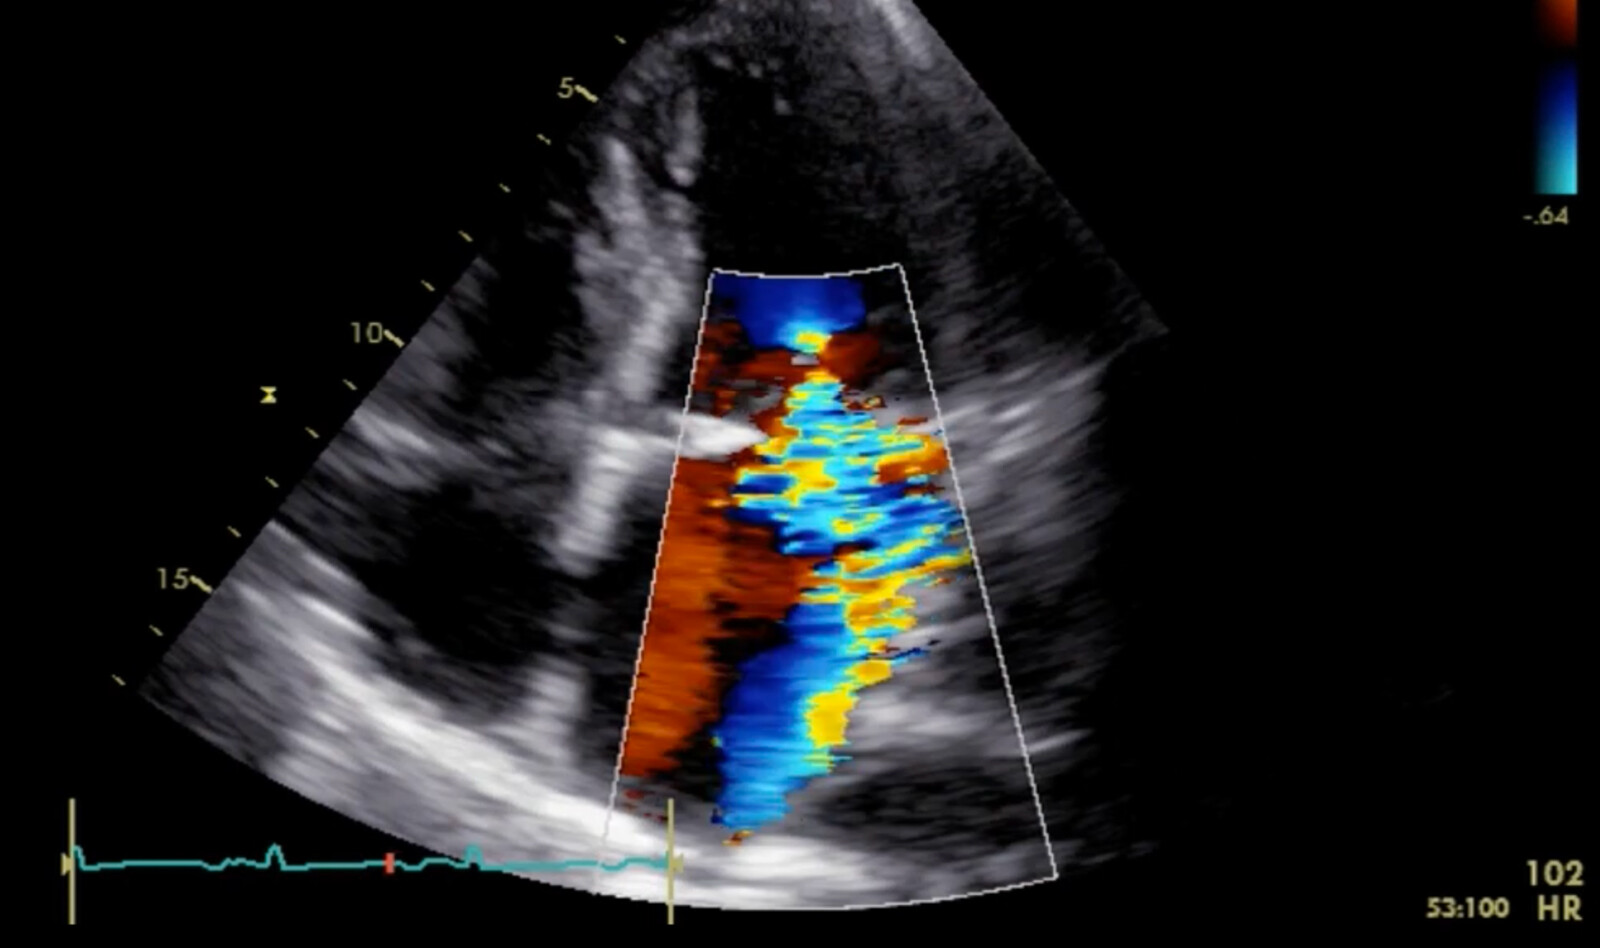 Image of point of care ultrasound point of care ultrasound echocardiogram echocardiogram echocardiogram critical care echocardiography AI abdominal ultrasound    Online PoCUS Training